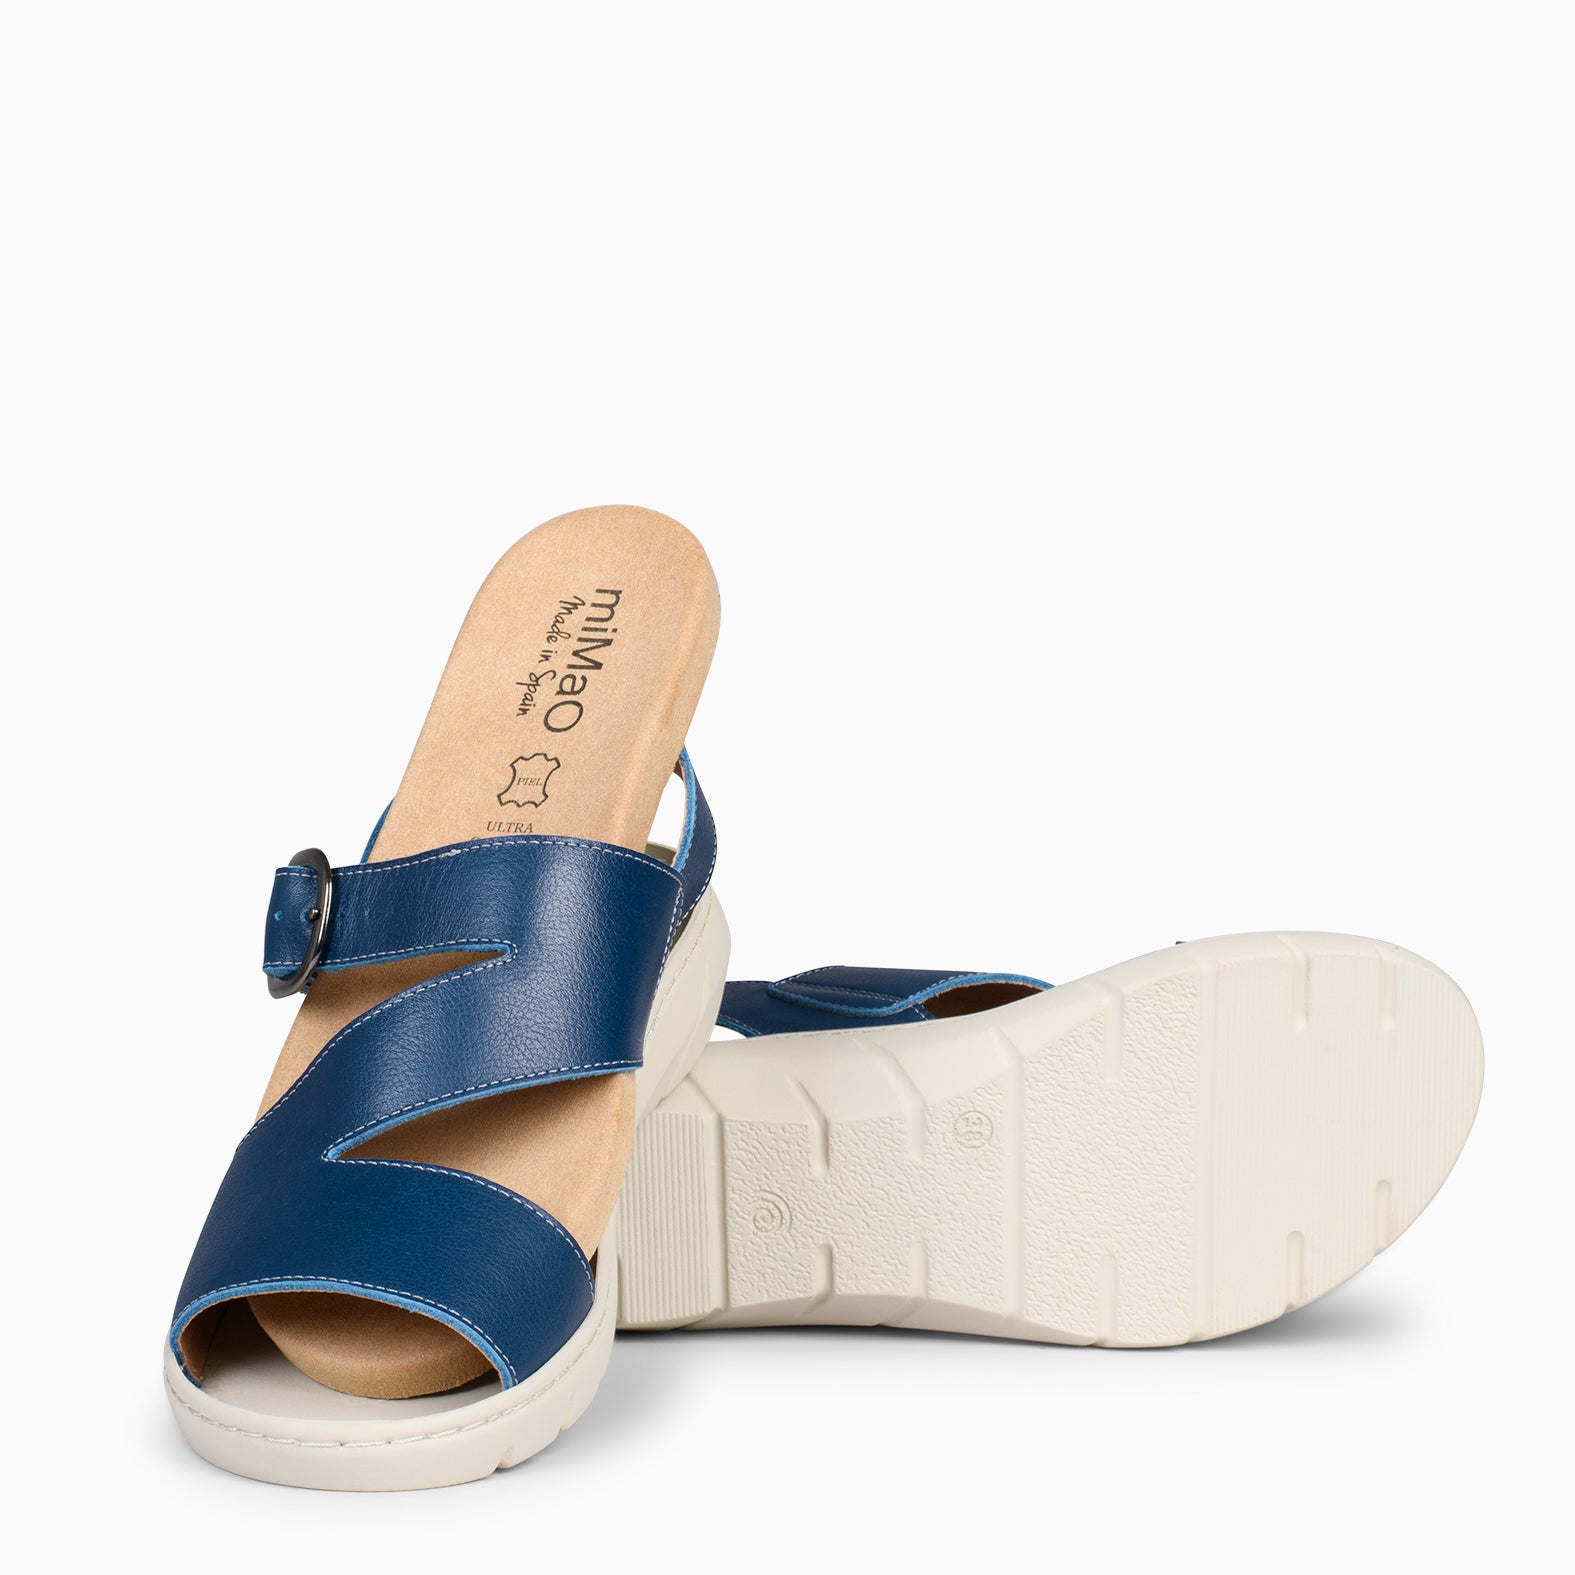 NATURA – BLUE sandals with removable insole